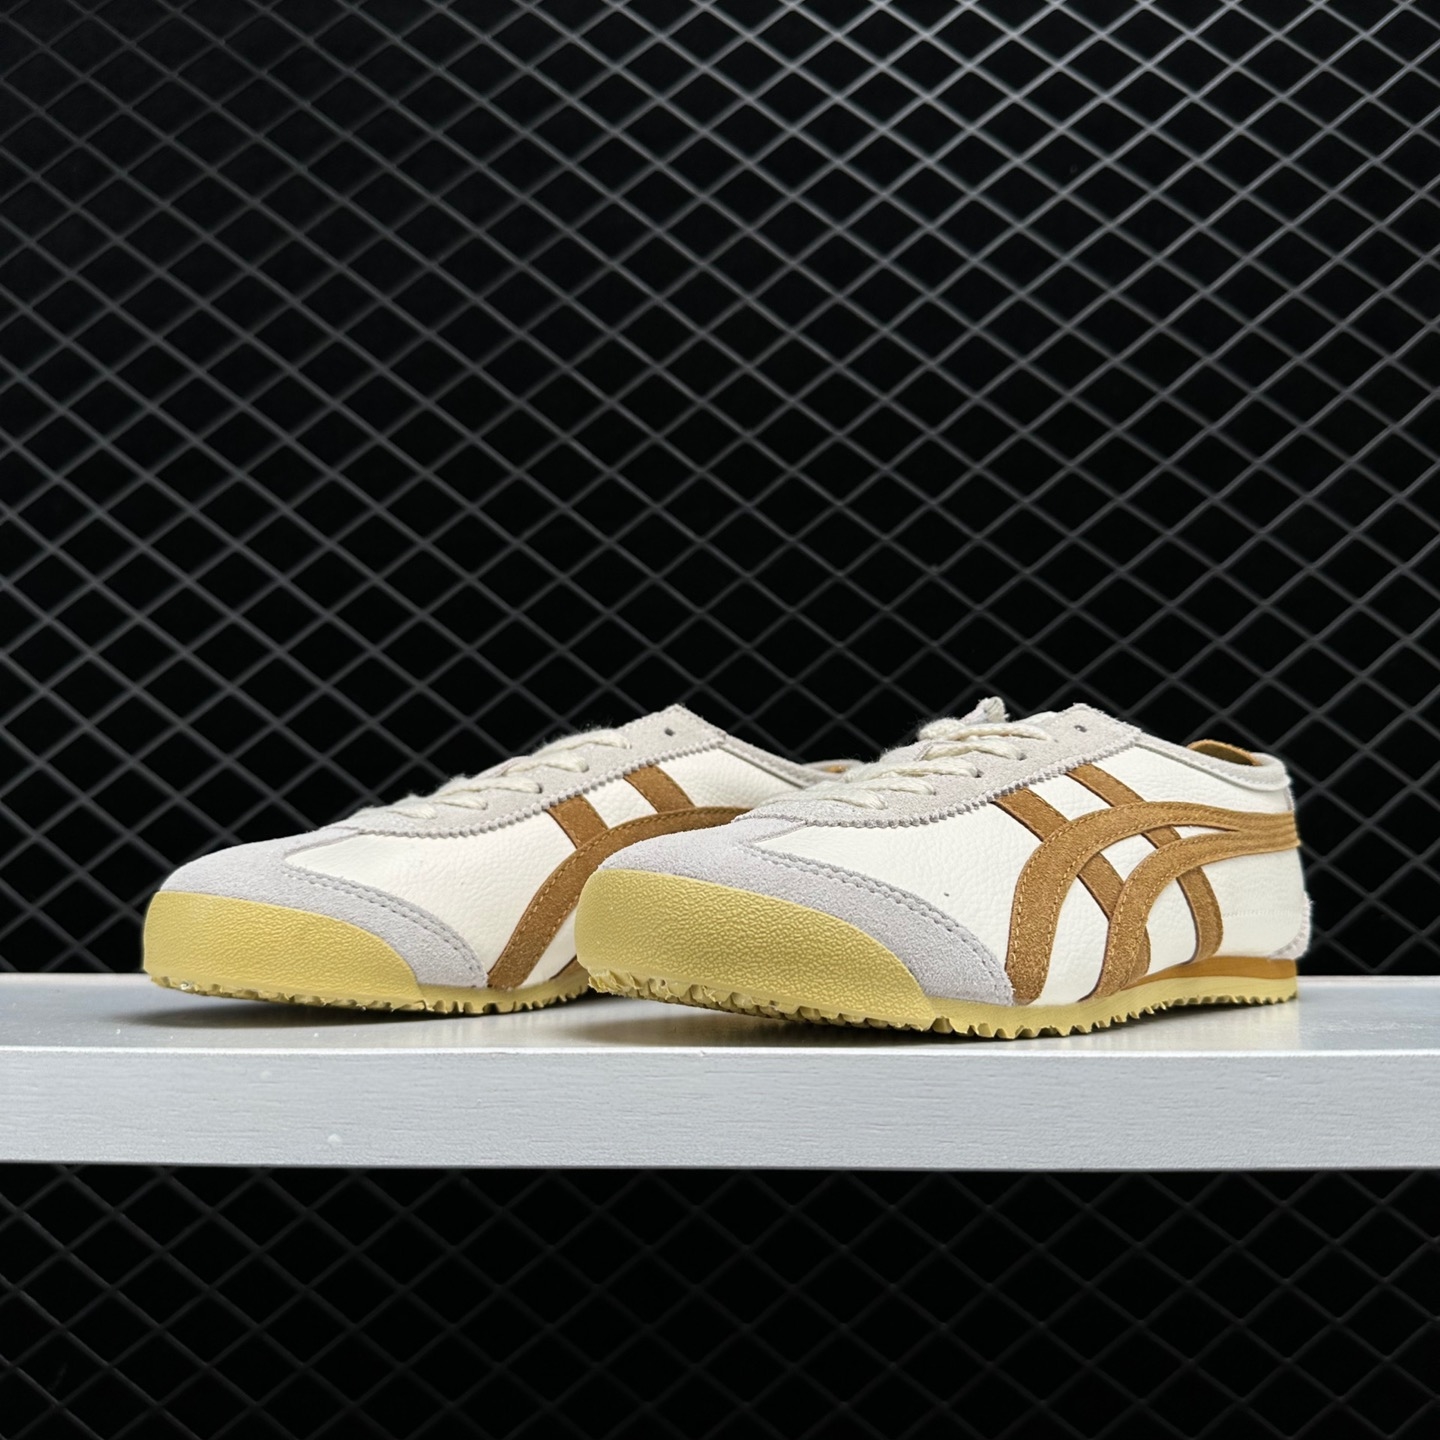 Onitsuka Tiger Mexico 66 White Brown 1183A693-101: Classic Sneakers with a Stylish Twist